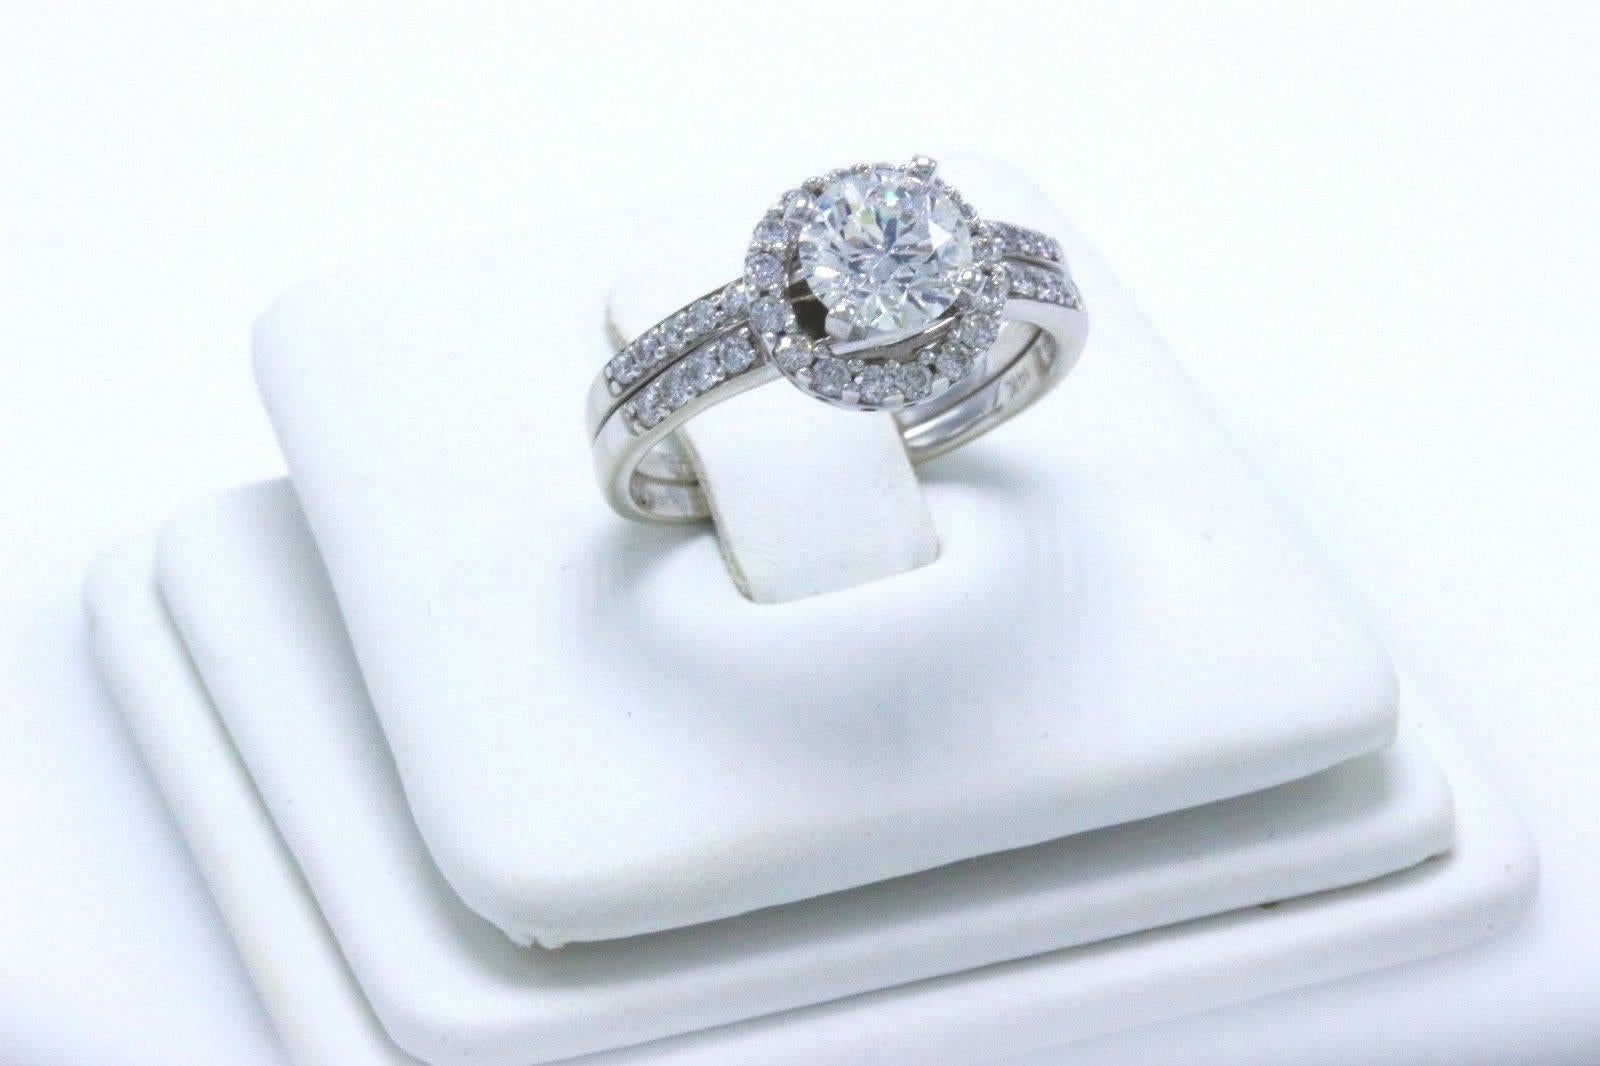 Tolkowsky Ideal Cut Round 1.54 Carat Diamond Band Ring in 14 Karat White Gold For Sale 2